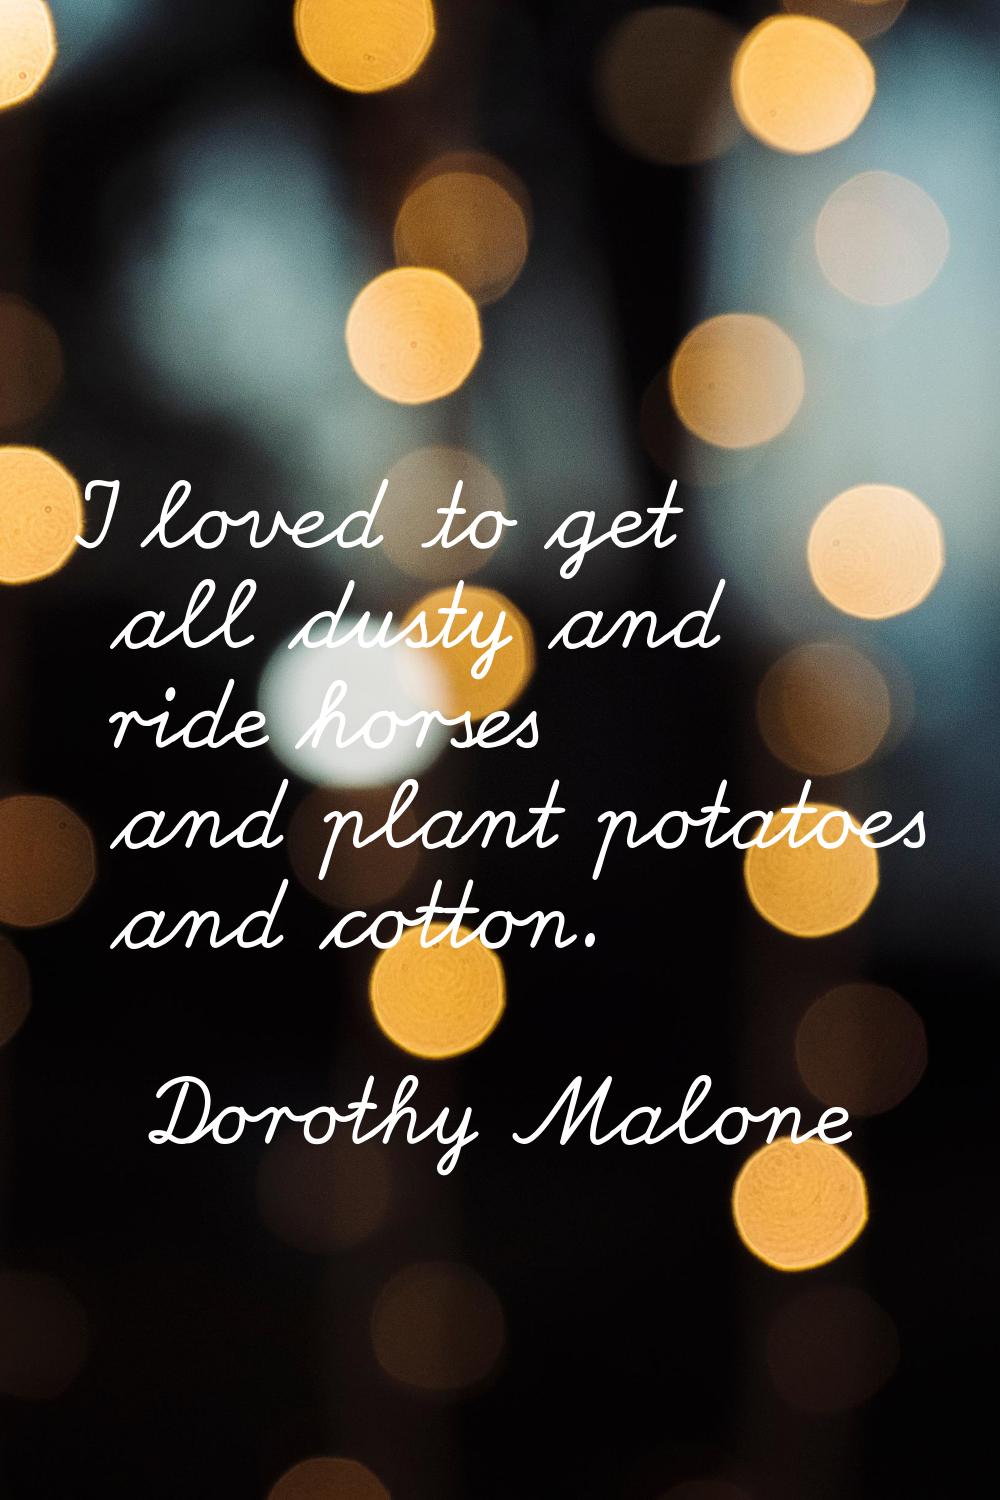 I loved to get all dusty and ride horses and plant potatoes and cotton.